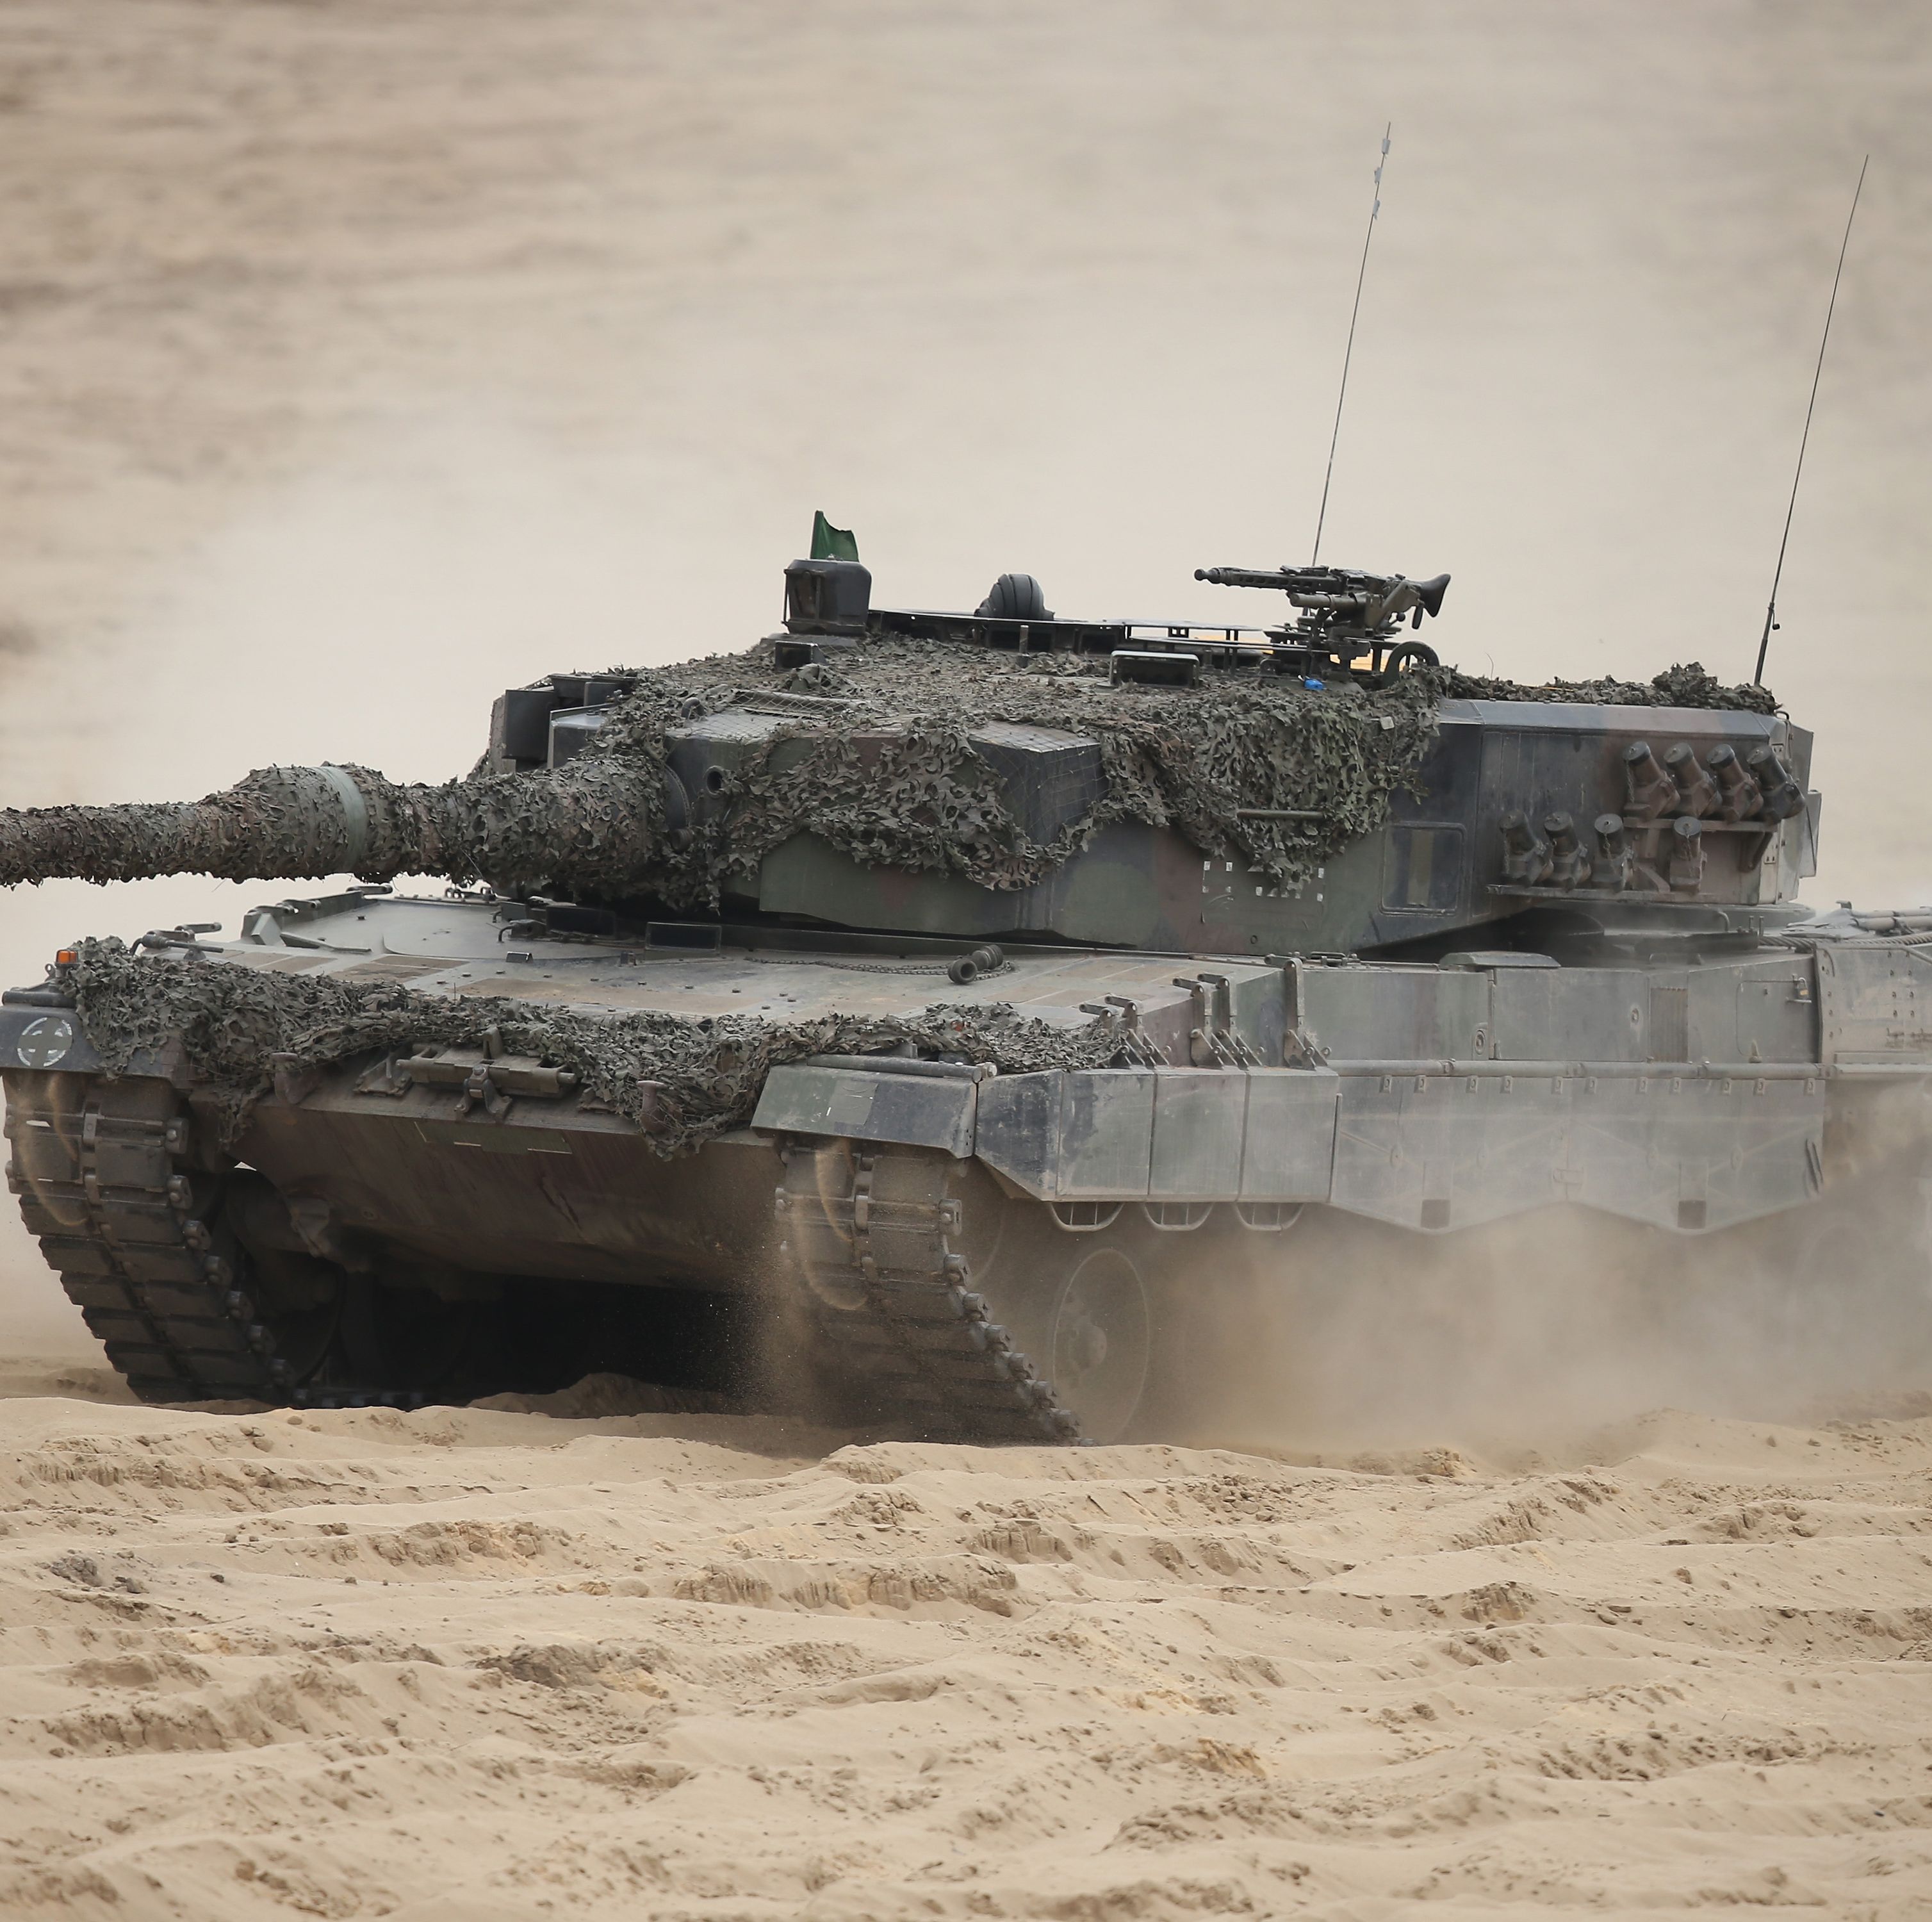 The U.K. and Poland Are Donating Modern Tanks to Ukraine, Escalating the War